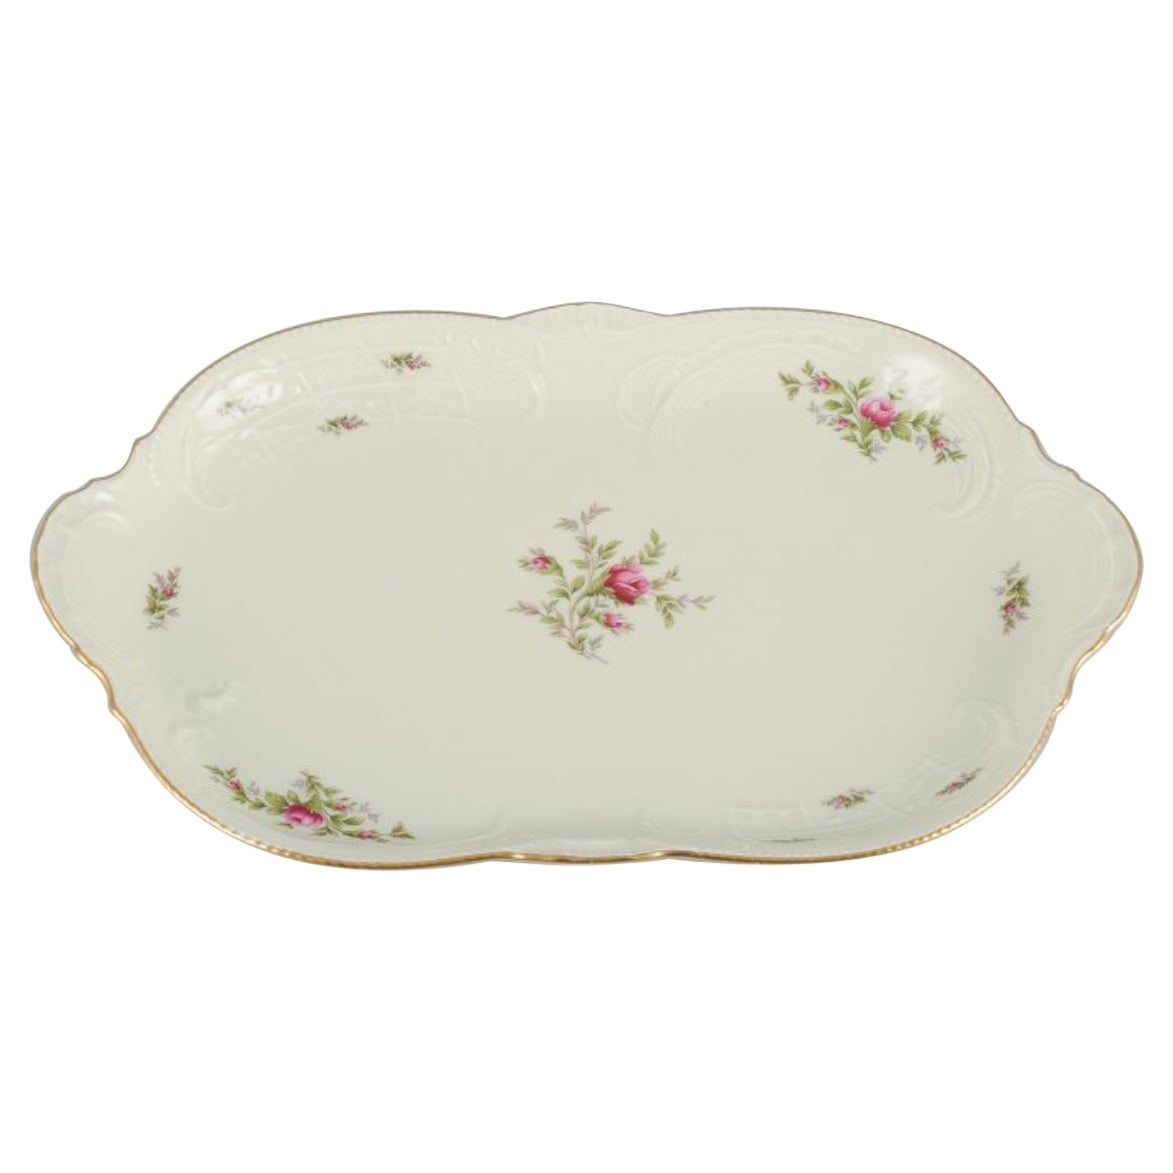 Rosenthal, Germany, "Sanssouci", Large Cream-Colored Serving Dish